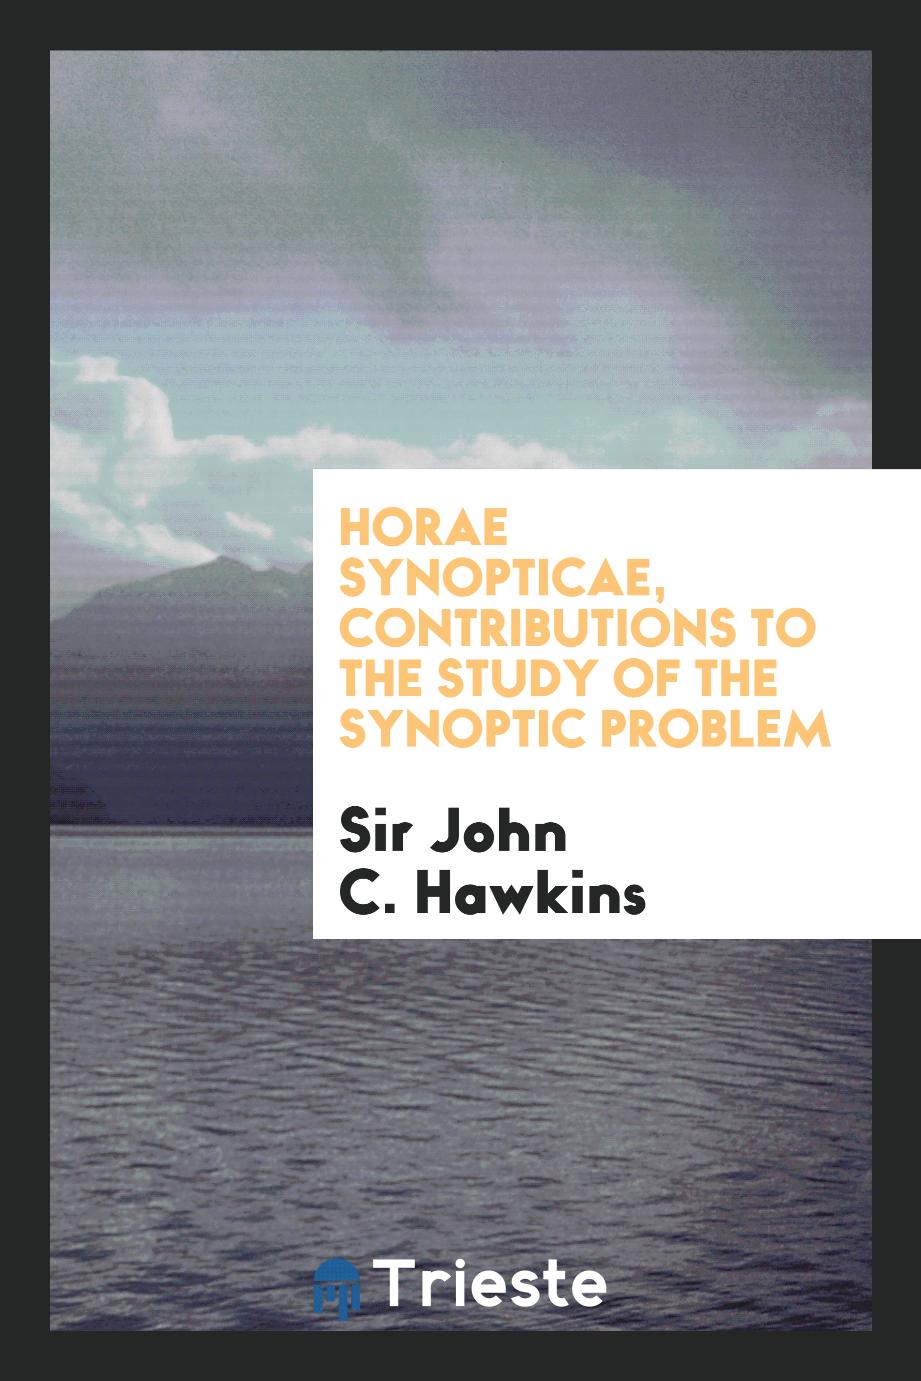 Horae Synopticae, contributions to the study of the synoptic problem